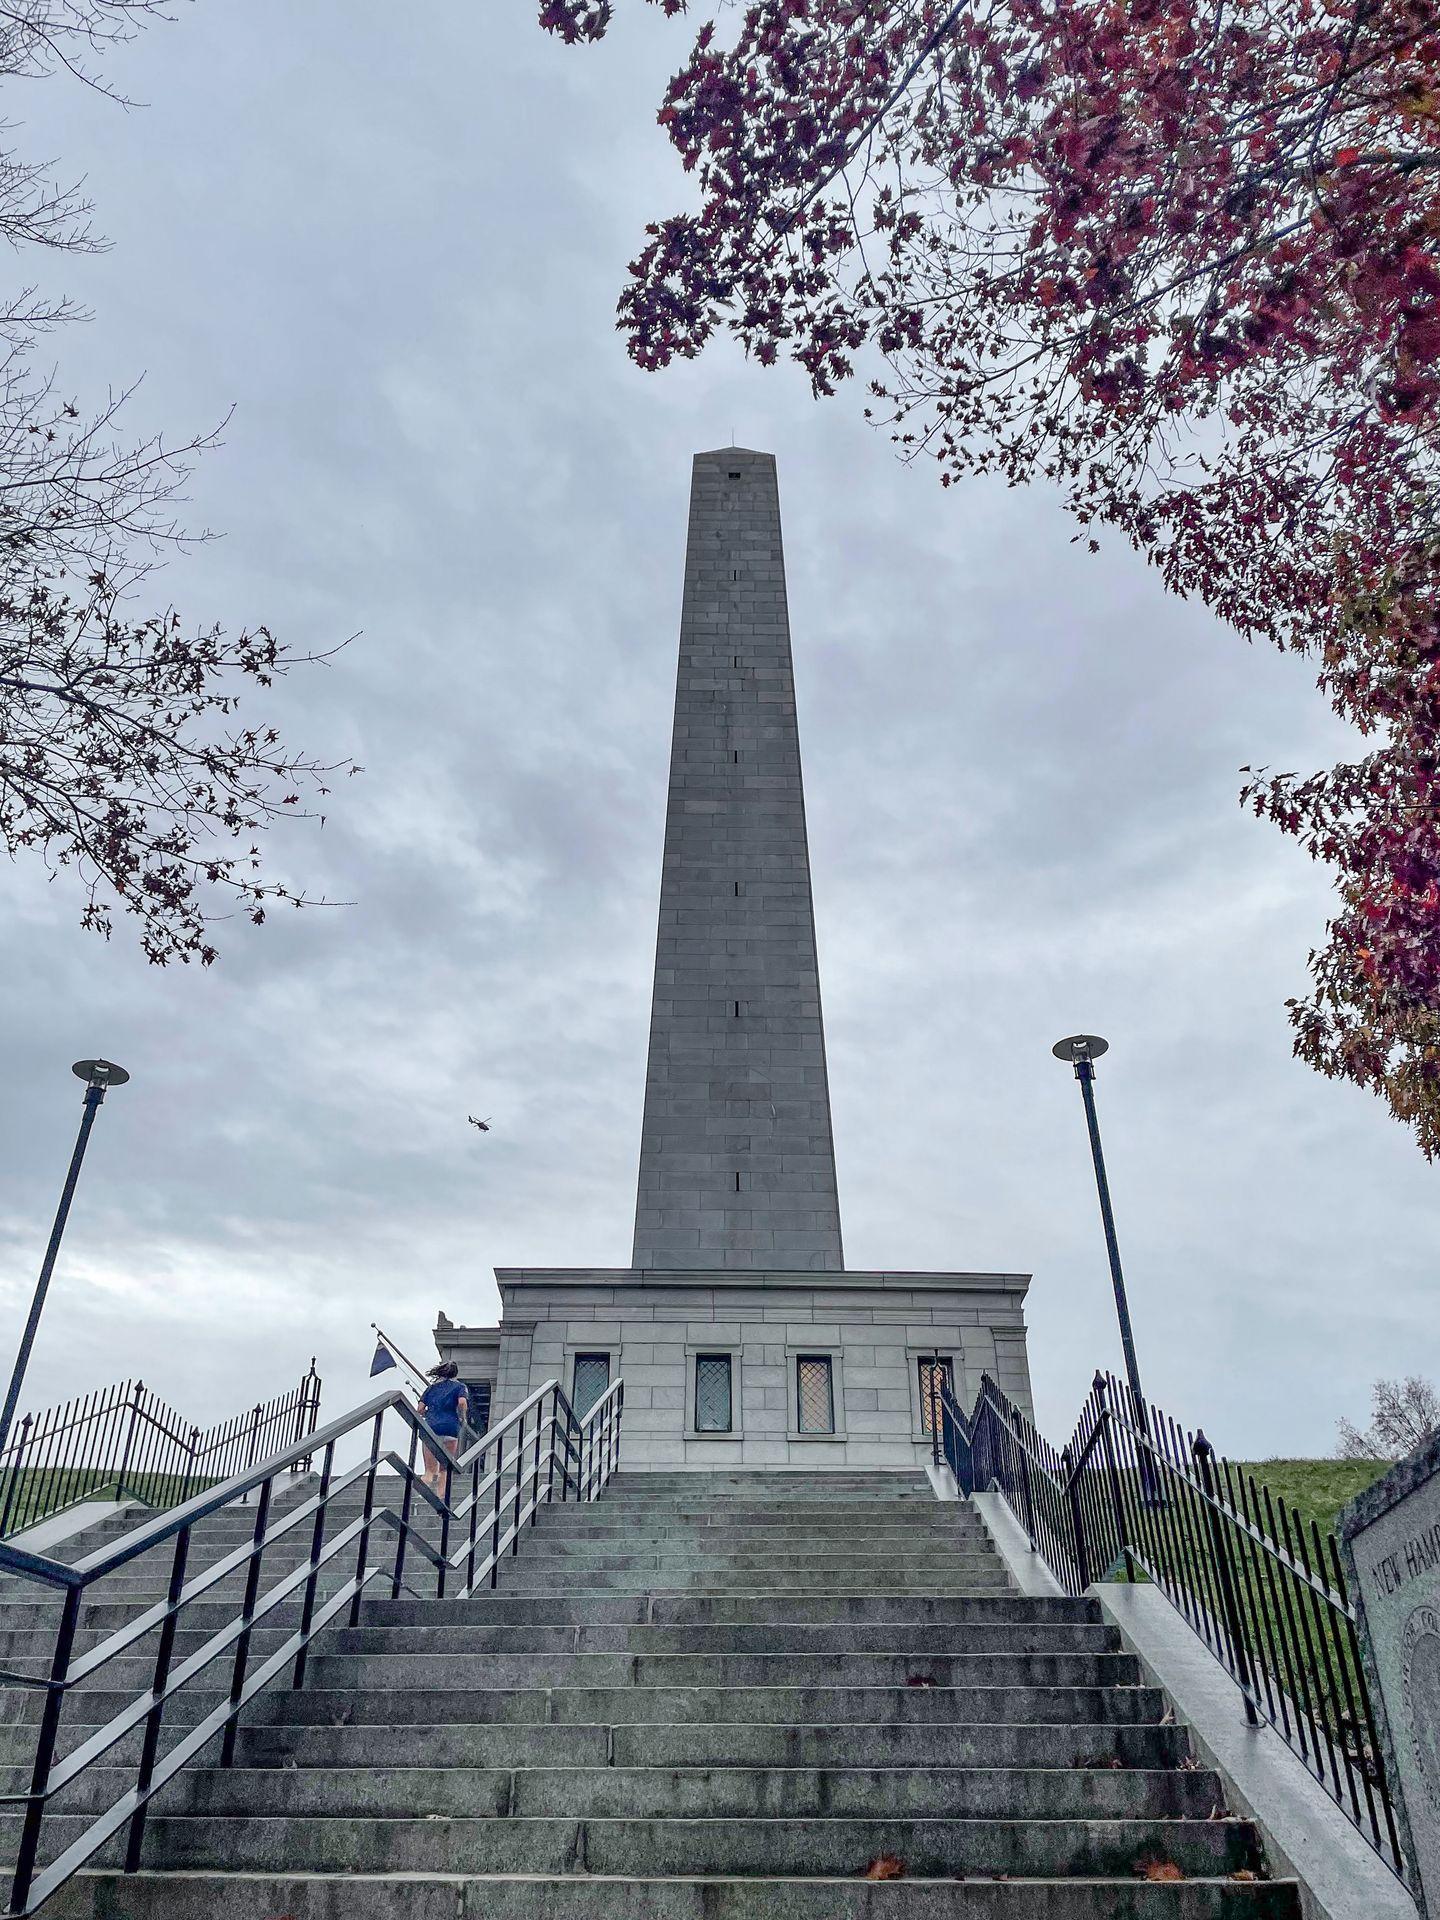 Looking up the Bunker Hill Monument. Several steps lead up to the base of the monument.